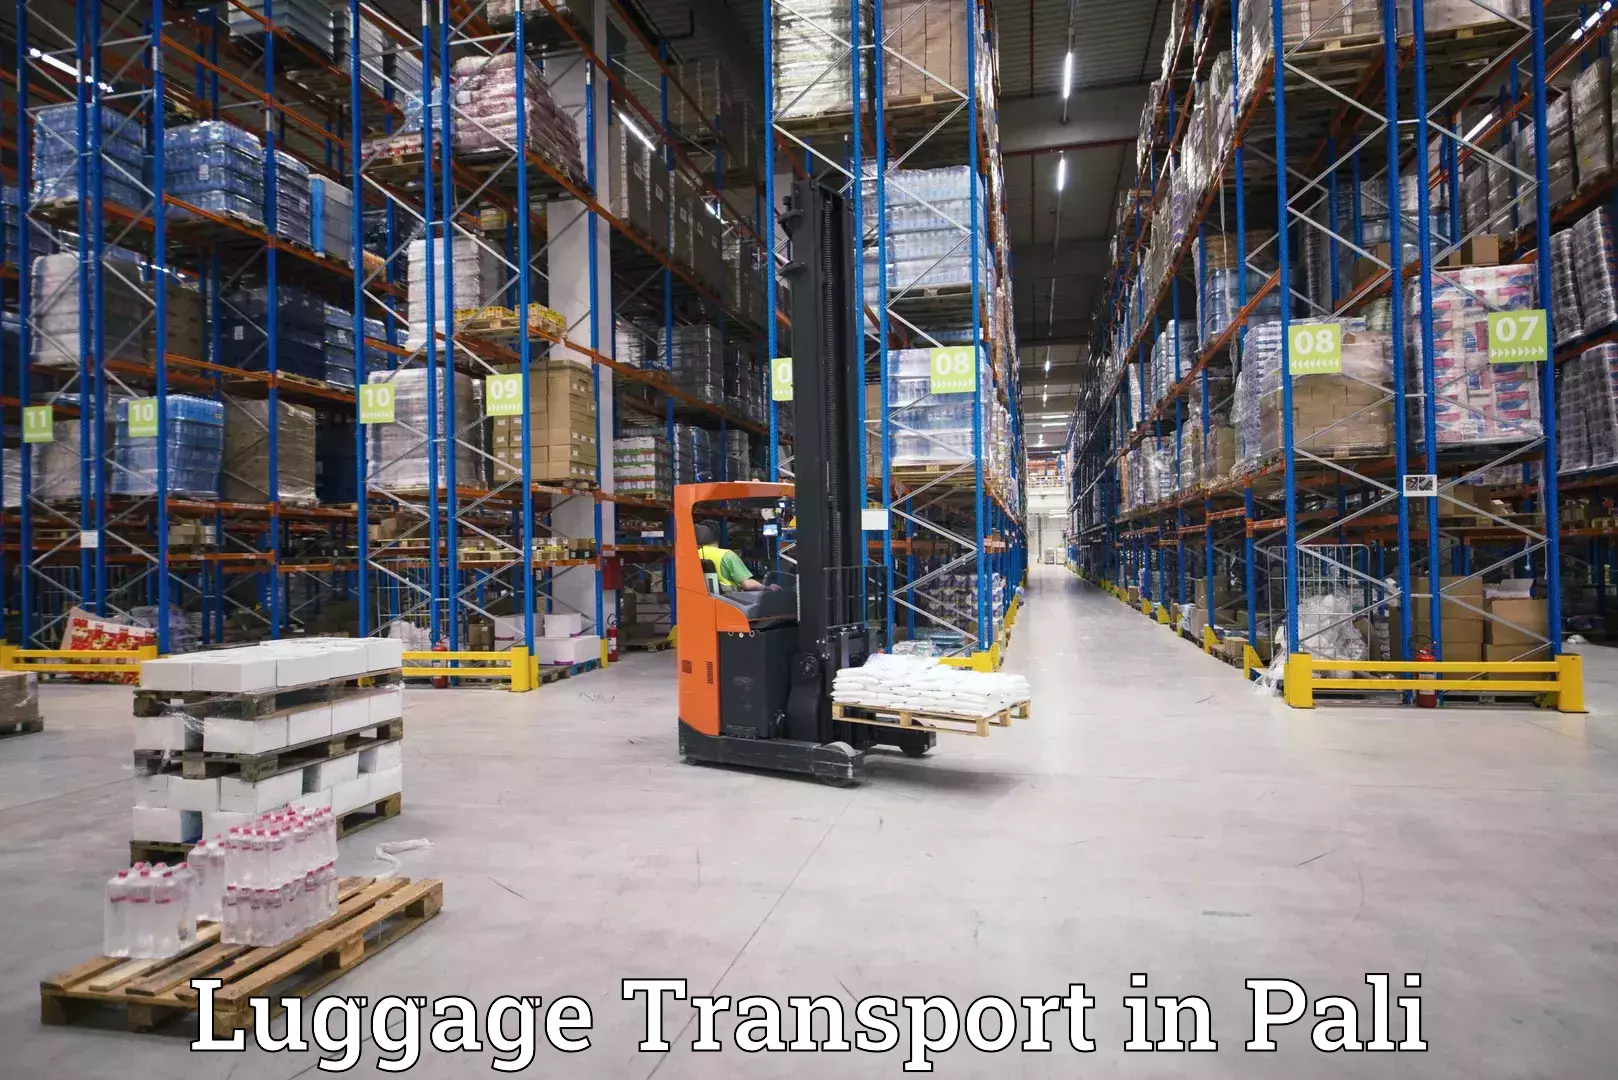 Luggage transport guidelines in Pali